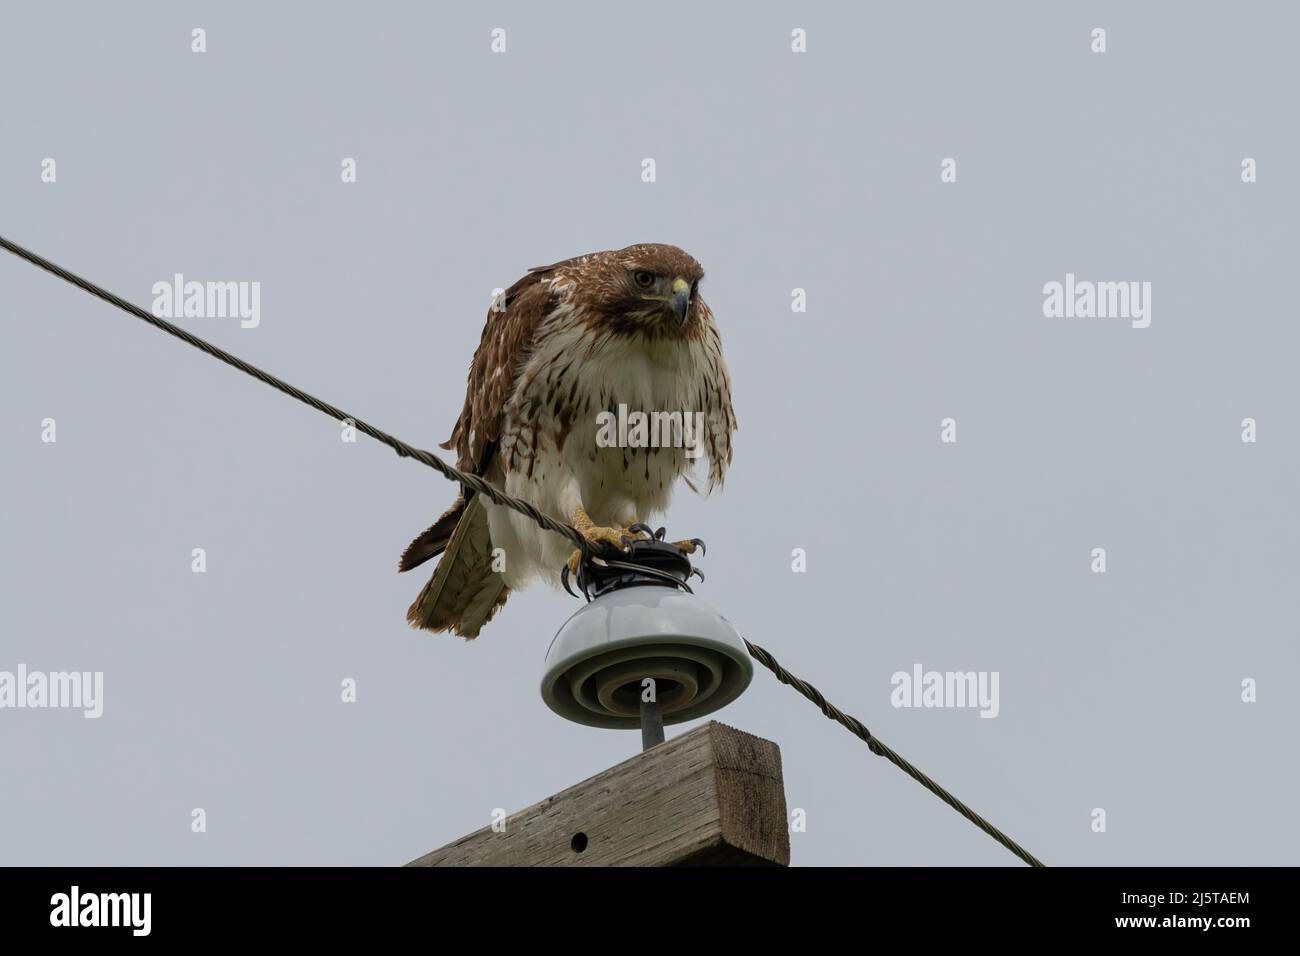 A molting Red-tailed Hawk with raggedy feathers perched on the insulator on top of a power pole as it searches the ground below for prey. Stock Photo